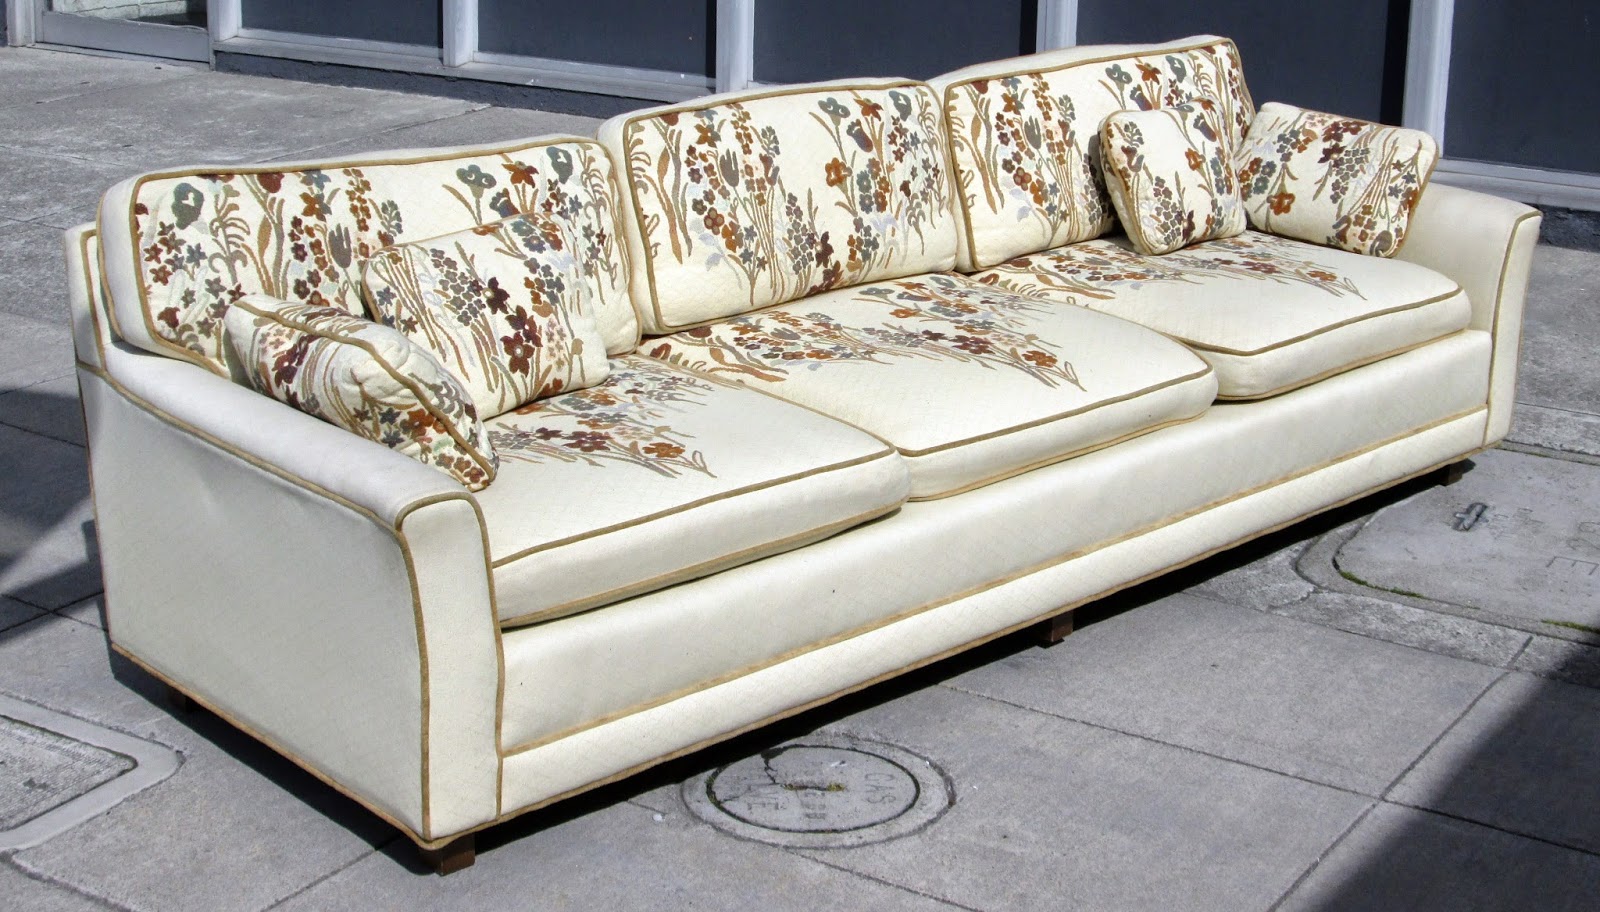 8 foot long leather sofa